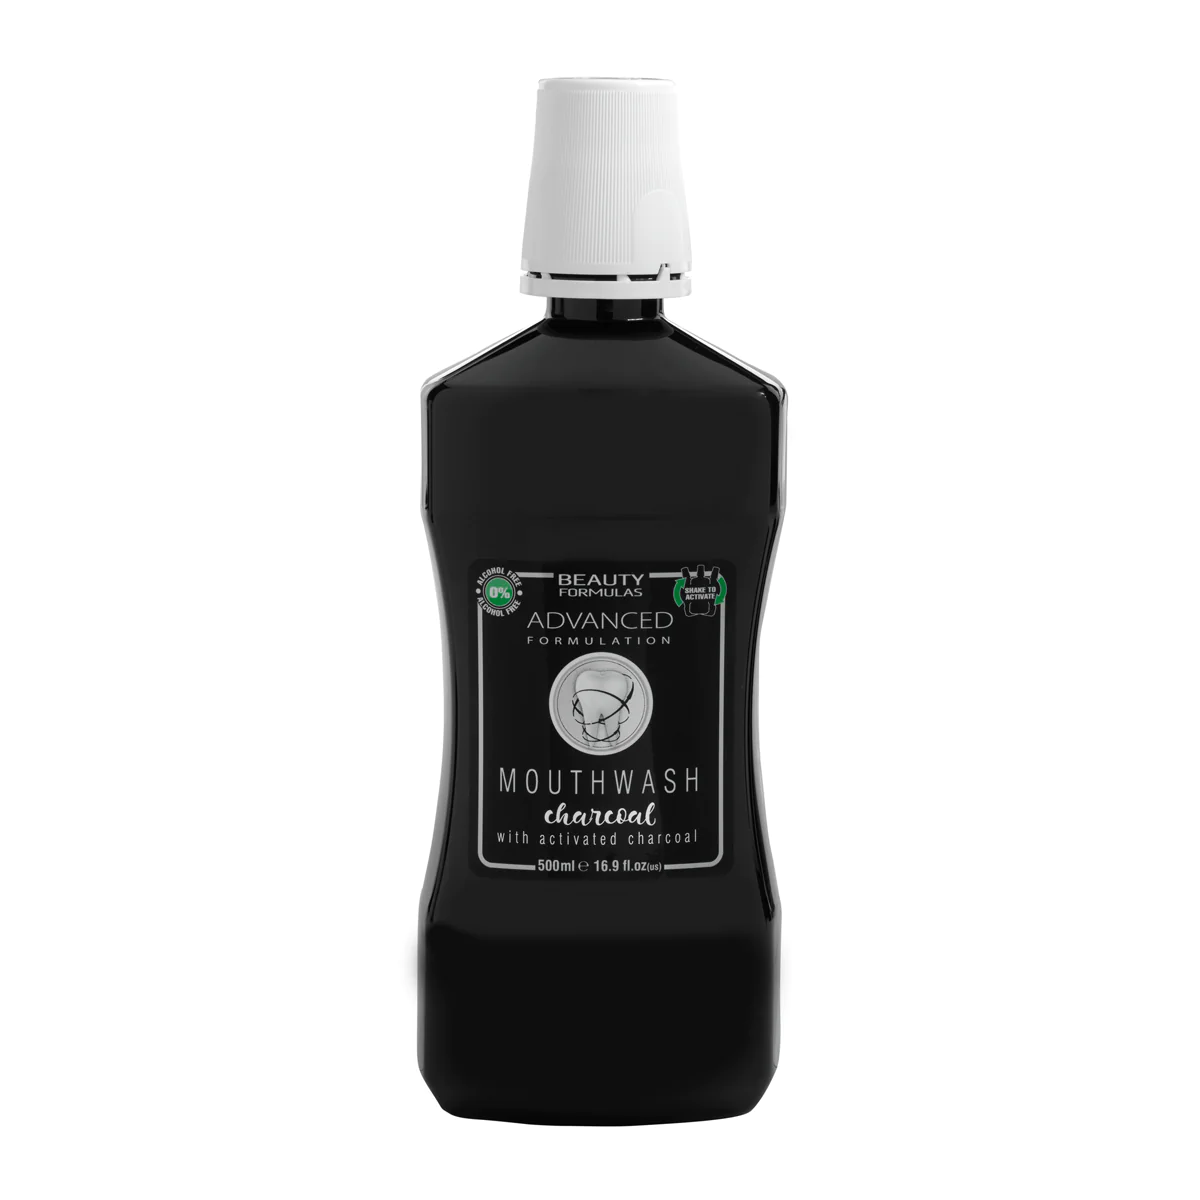 Beauty Formulas Mouthwash with Activated Carbon 500ml